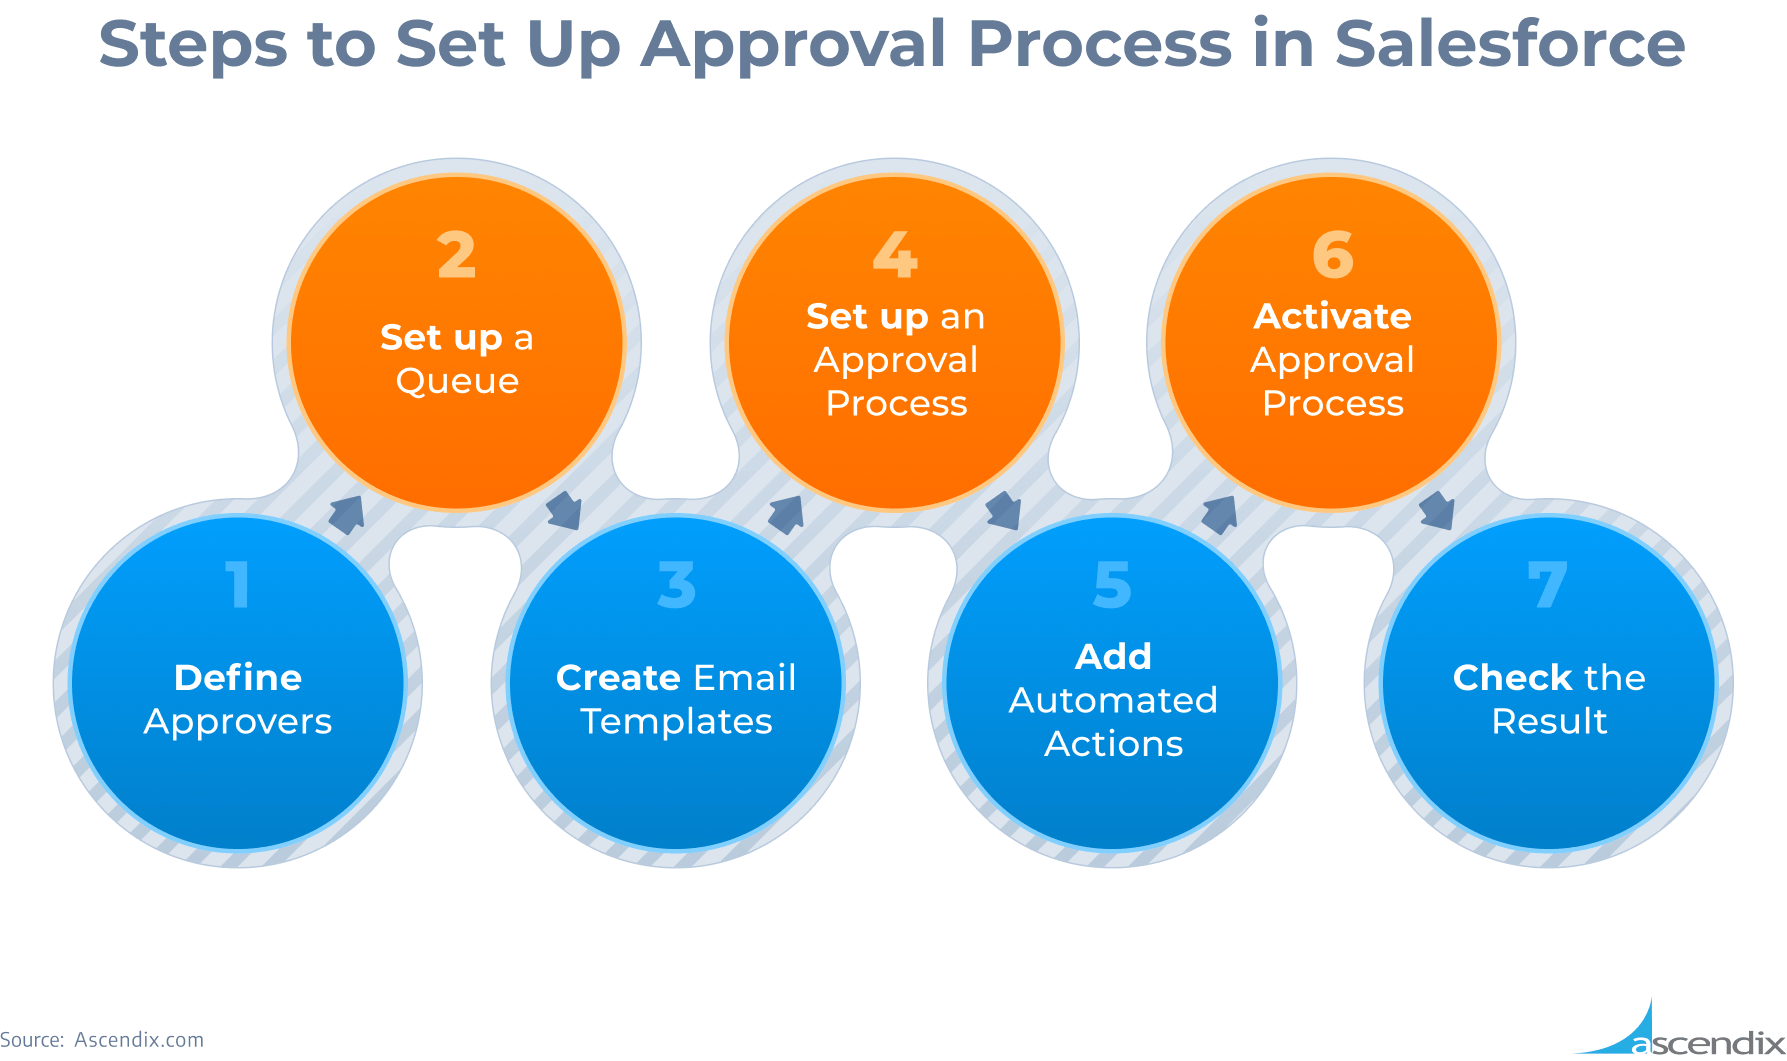 Steps on How to Set Up Approval Process in Salesforce | Ascendix